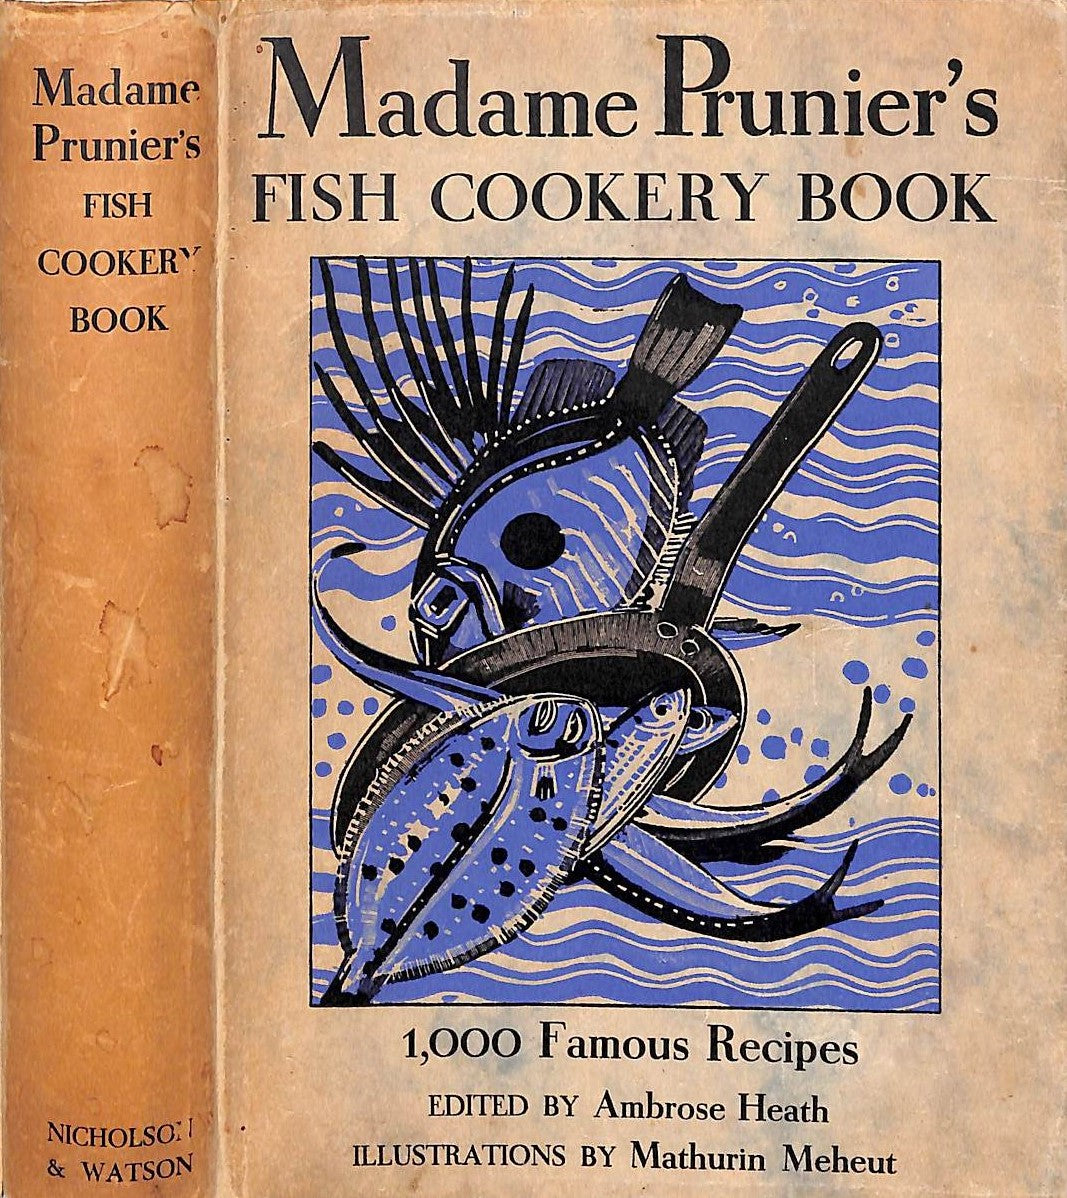 "Madame Prunier's Fish Cookery Book 1,000 Famous Recipes" 1938 HEATH, Ambrose